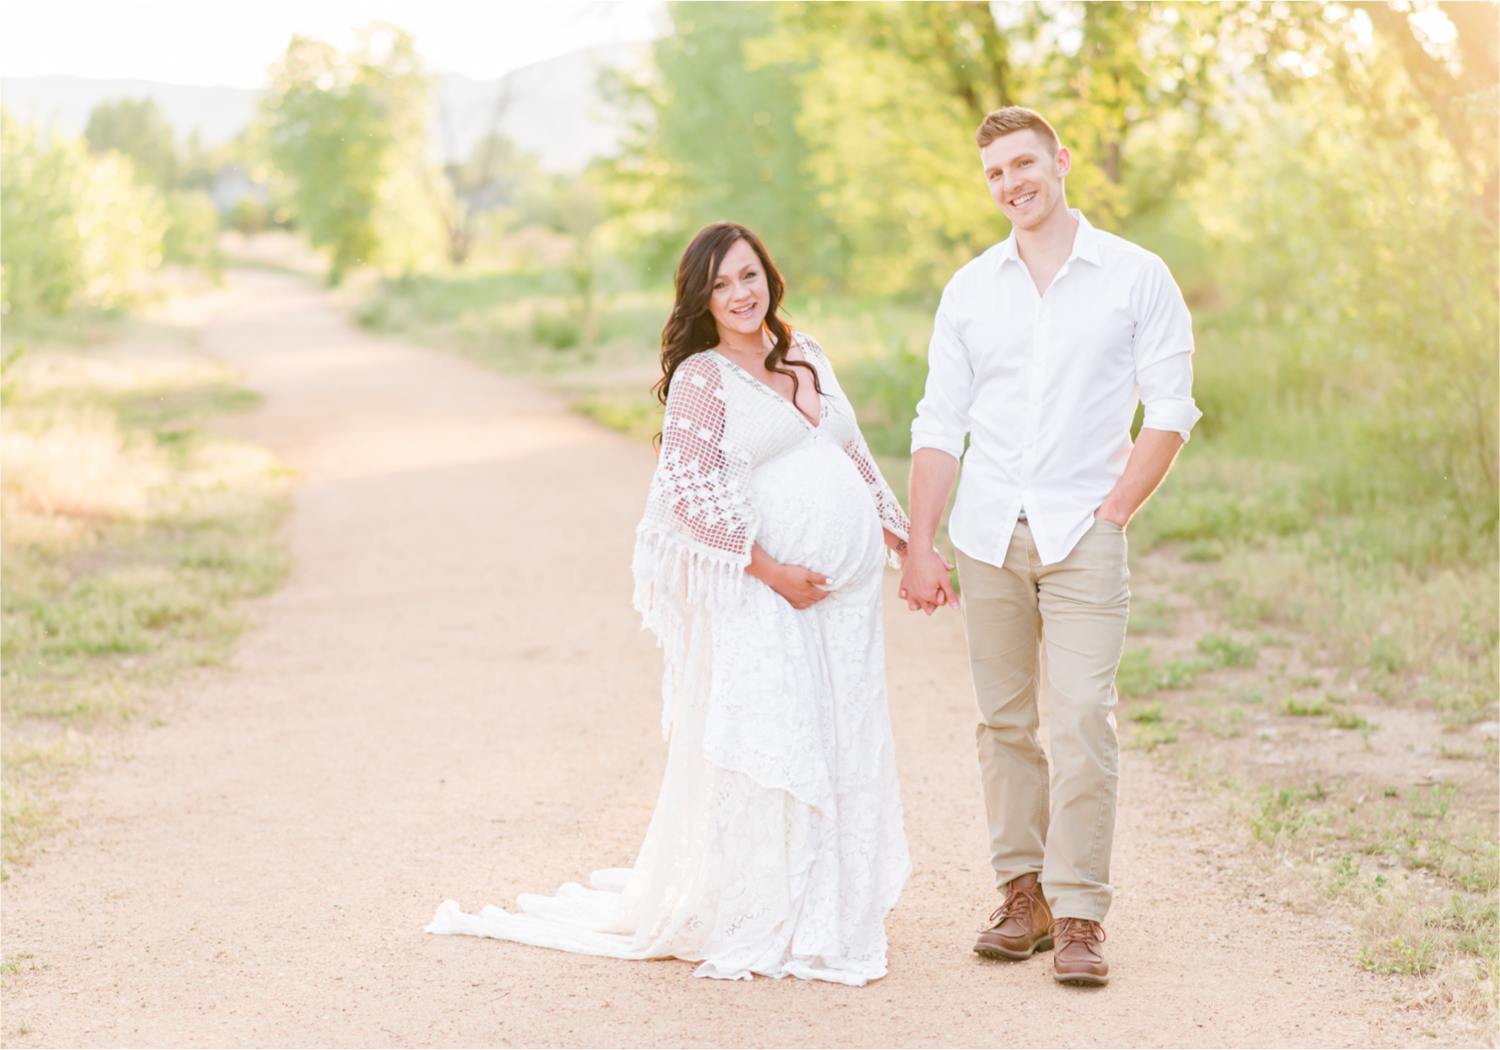 Spring Maternity Session in Loveland Colorado | Britni Girard Photography | Romantic Boho Inspired Maternity Session with Reclamation Dress at River's Edge | Colorado Wedding and Lifestyle Photographer